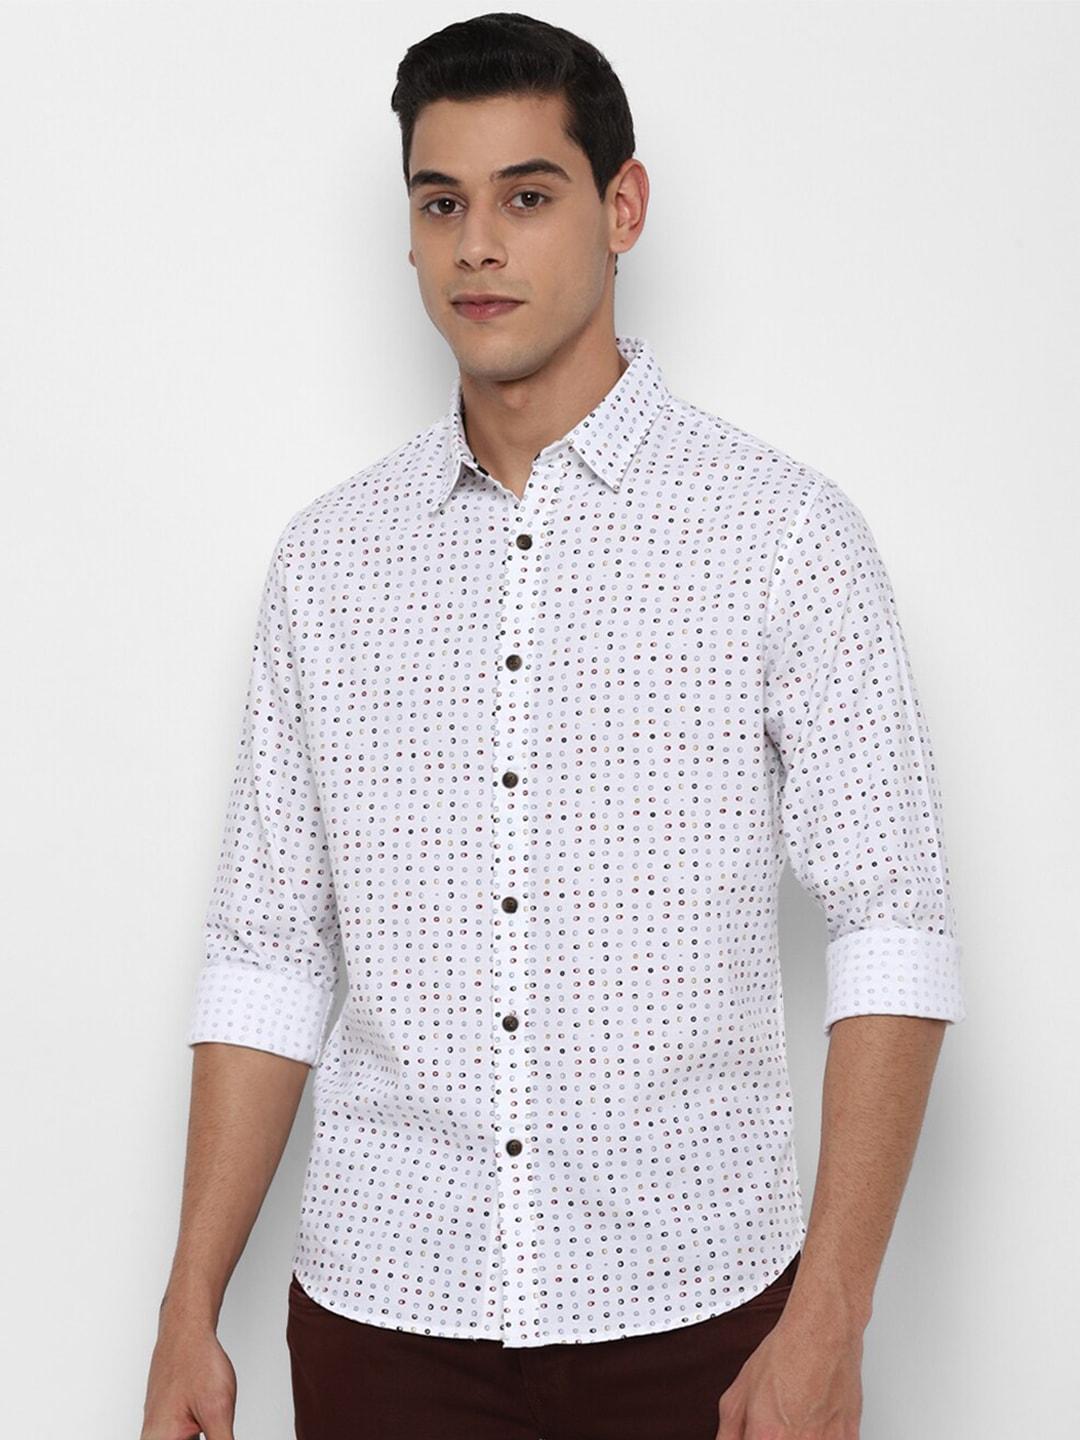 forever-21-men-white-printed-regular-fit-cotton-casual-shirt